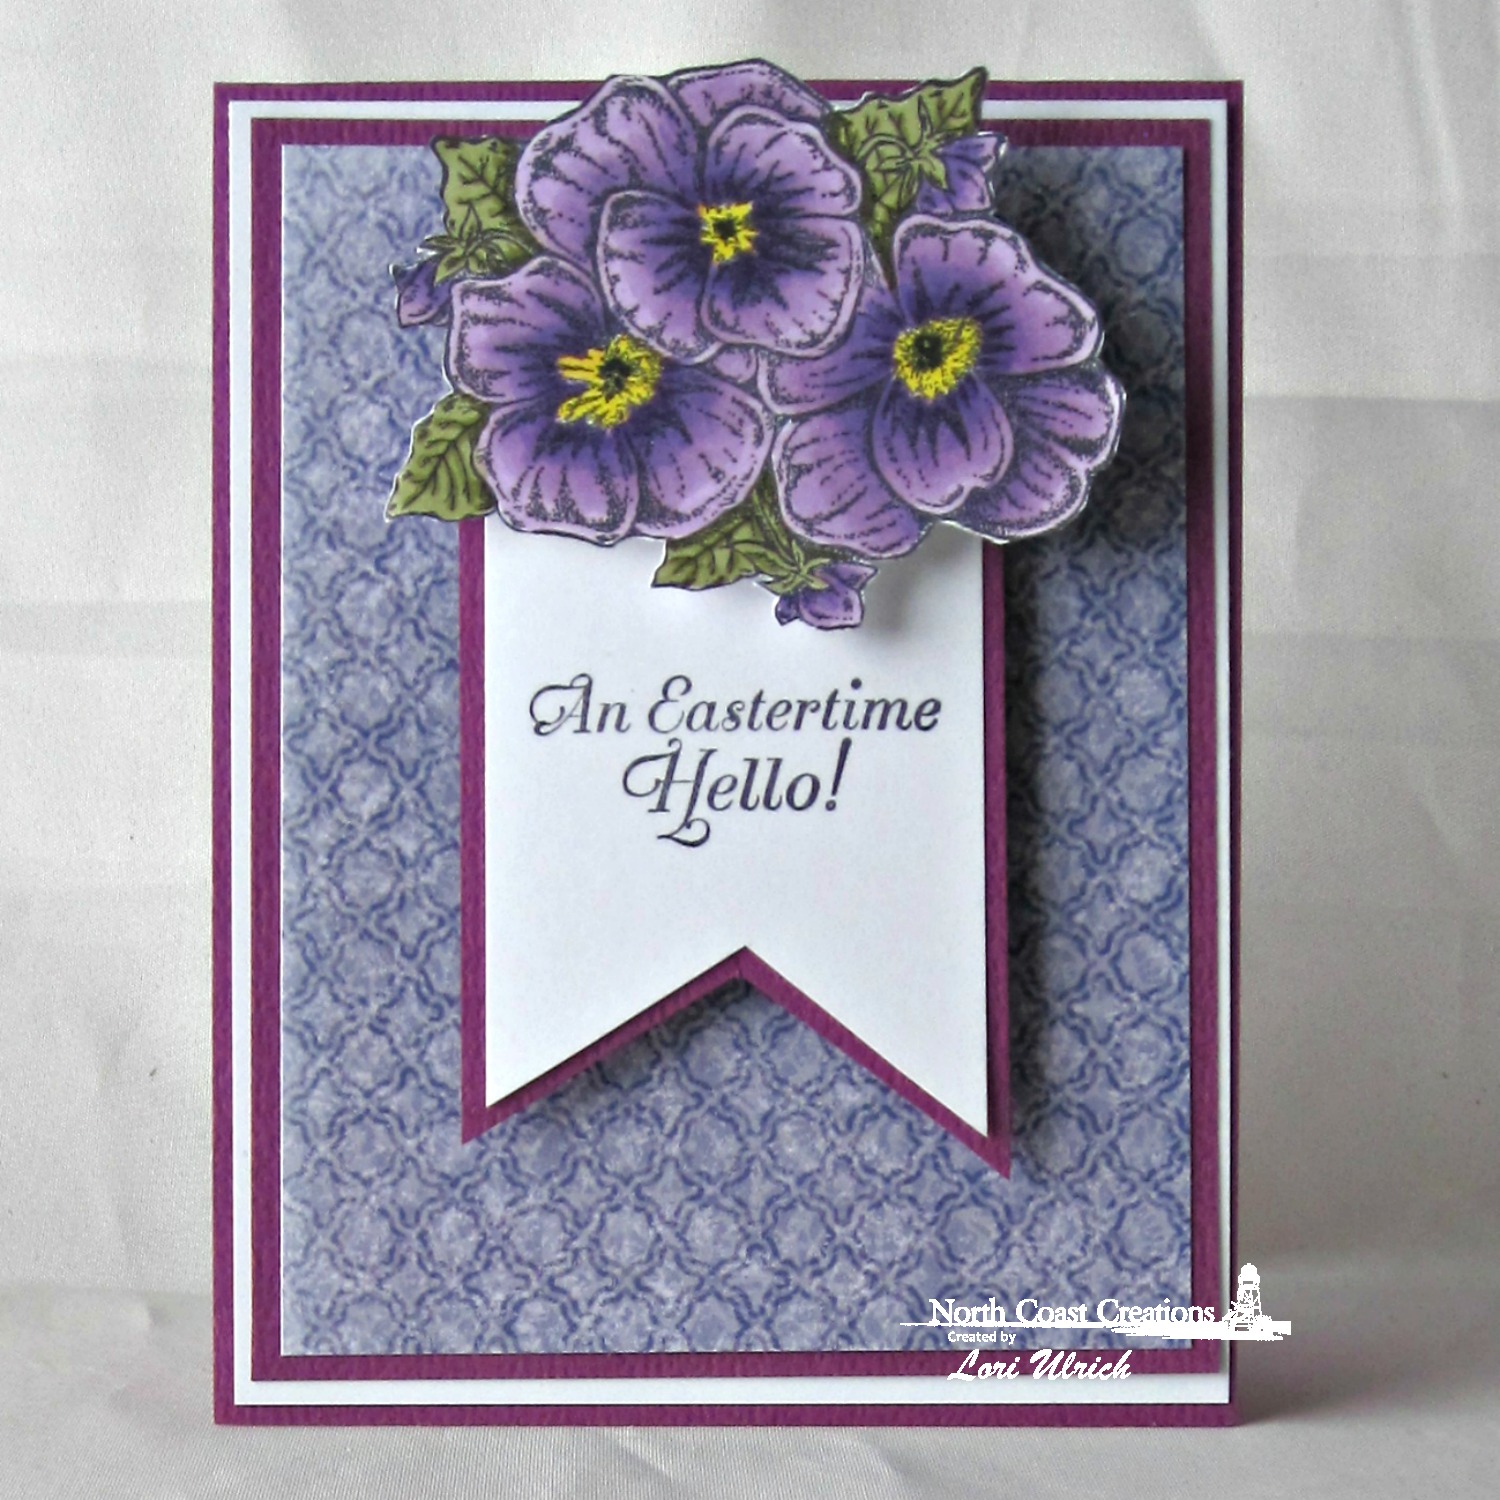 Stamps - North Coast Creations Pansies, ODBD Christian Faith Paper Collection